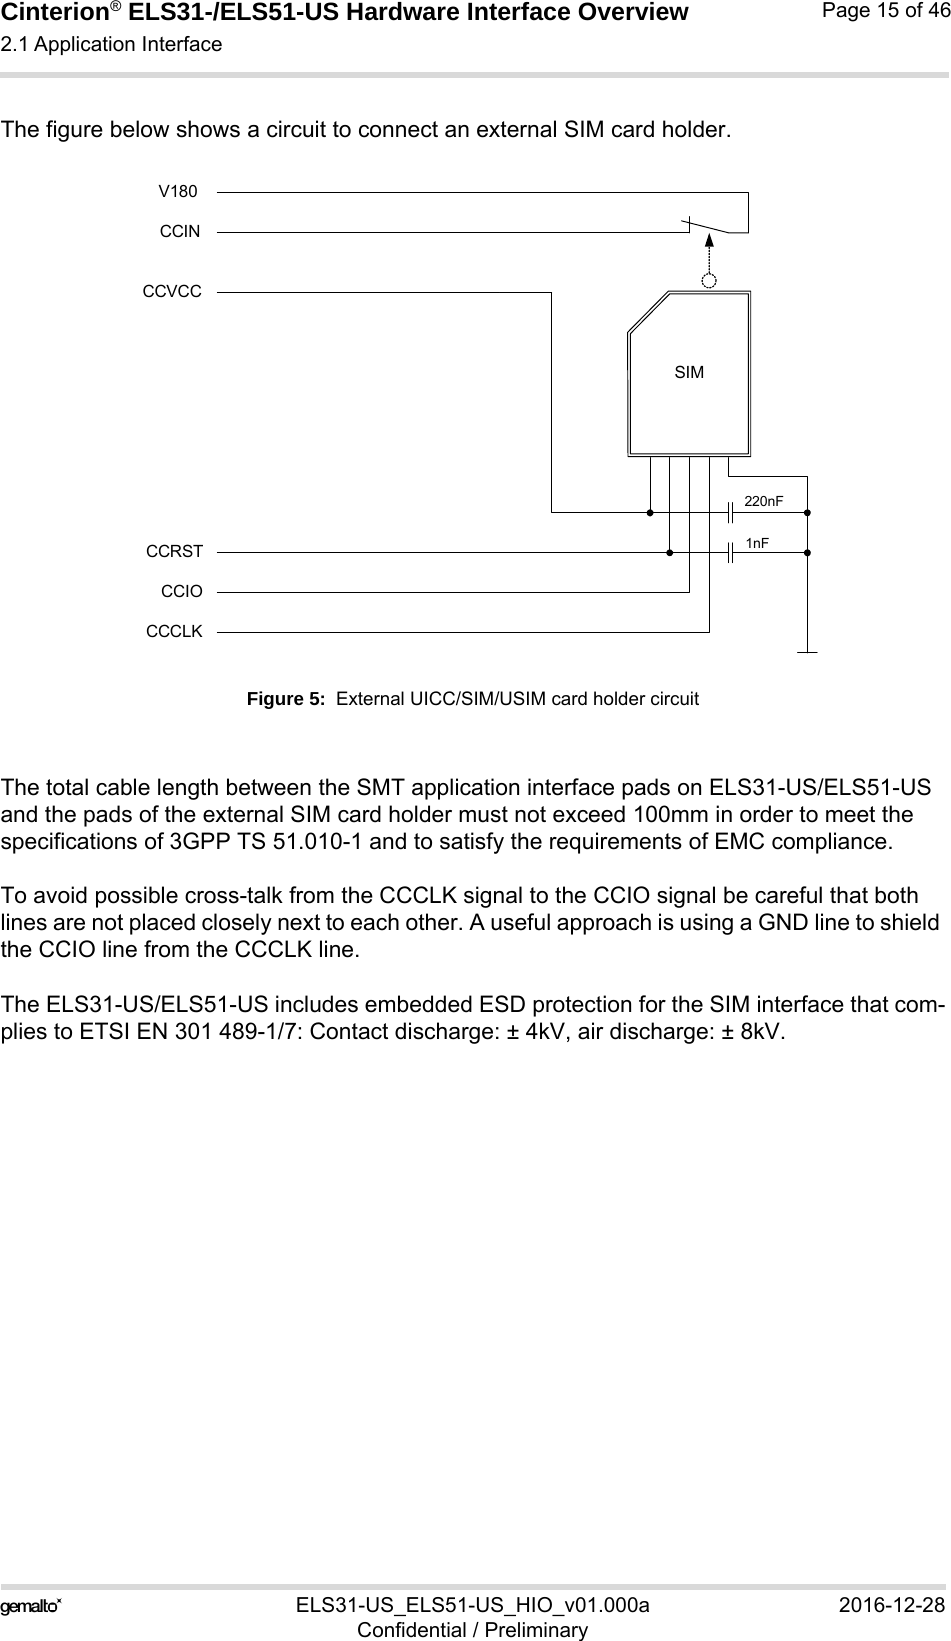 Cinterion® ELS31-/ELS51-US Hardware Interface Overview2.1 Application Interface29ELS31-US_ELS51-US_HIO_v01.000a 2016-12-28Confidential / PreliminaryPage 15 of 46The figure below shows a circuit to connect an external SIM card holder.Figure 5:  External UICC/SIM/USIM card holder circuitThe total cable length between the SMT application interface pads on ELS31-US/ELS51-US and the pads of the external SIM card holder must not exceed 100mm in order to meet the specifications of 3GPP TS 51.010-1 and to satisfy the requirements of EMC compliance.To avoid possible cross-talk from the CCCLK signal to the CCIO signal be careful that both lines are not placed closely next to each other. A useful approach is using a GND line to shield the CCIO line from the CCCLK line.The ELS31-US/ELS51-US includes embedded ESD protection for the SIM interface that com-plies to ETSI EN 301 489-1/7: Contact discharge: ± 4kV, air discharge: ± 8kV.SIMCCVCCCCRSTCCIOCCCLK220nF1nFCCINV180